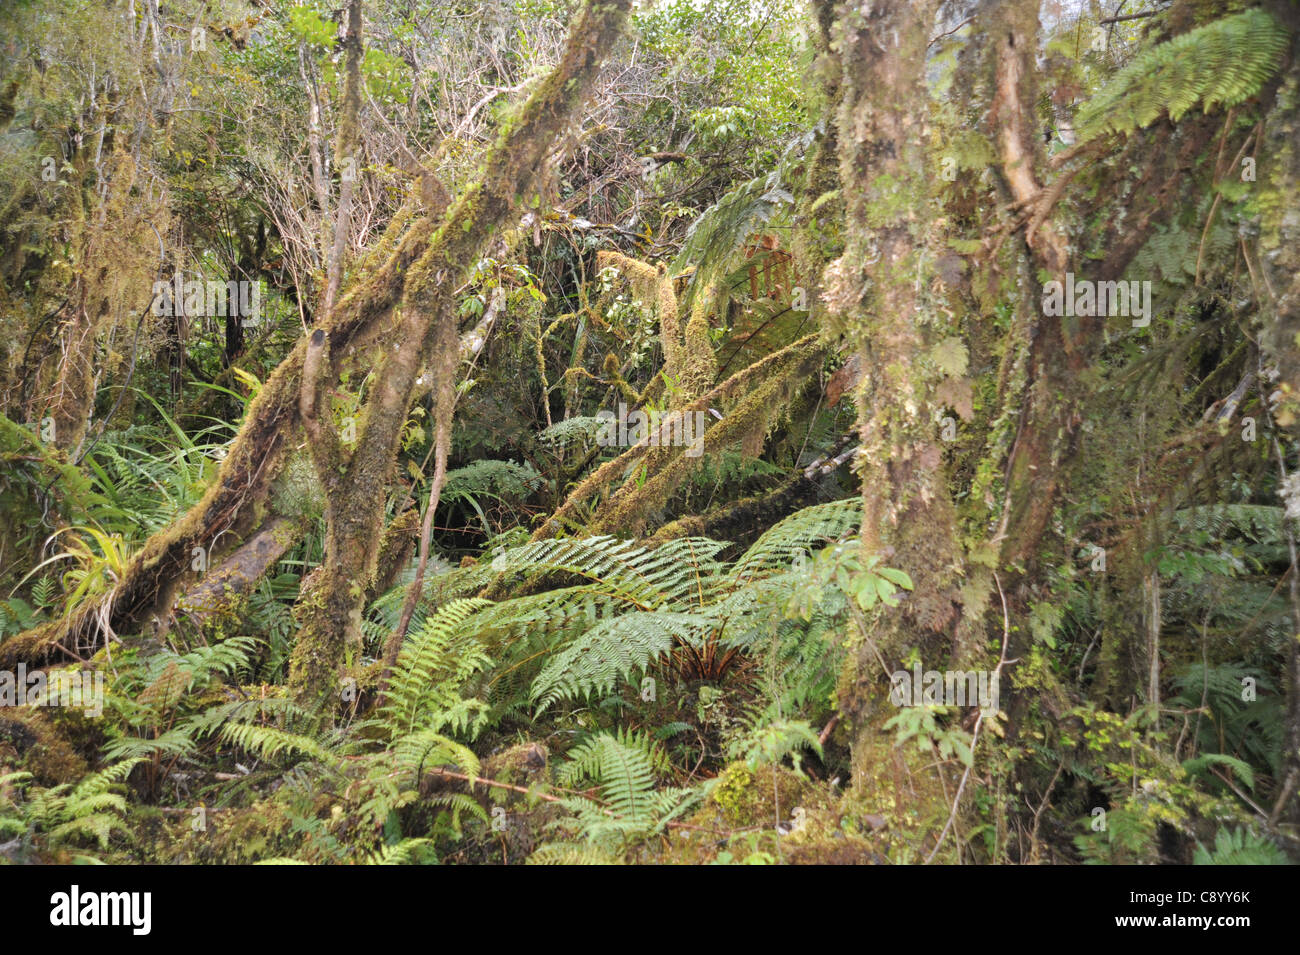 New Zealand’s temperate rainforest floor is festooned with mosses ferns, grasses, flaxes, liverworts, all in perfect harmony. Stock Photo